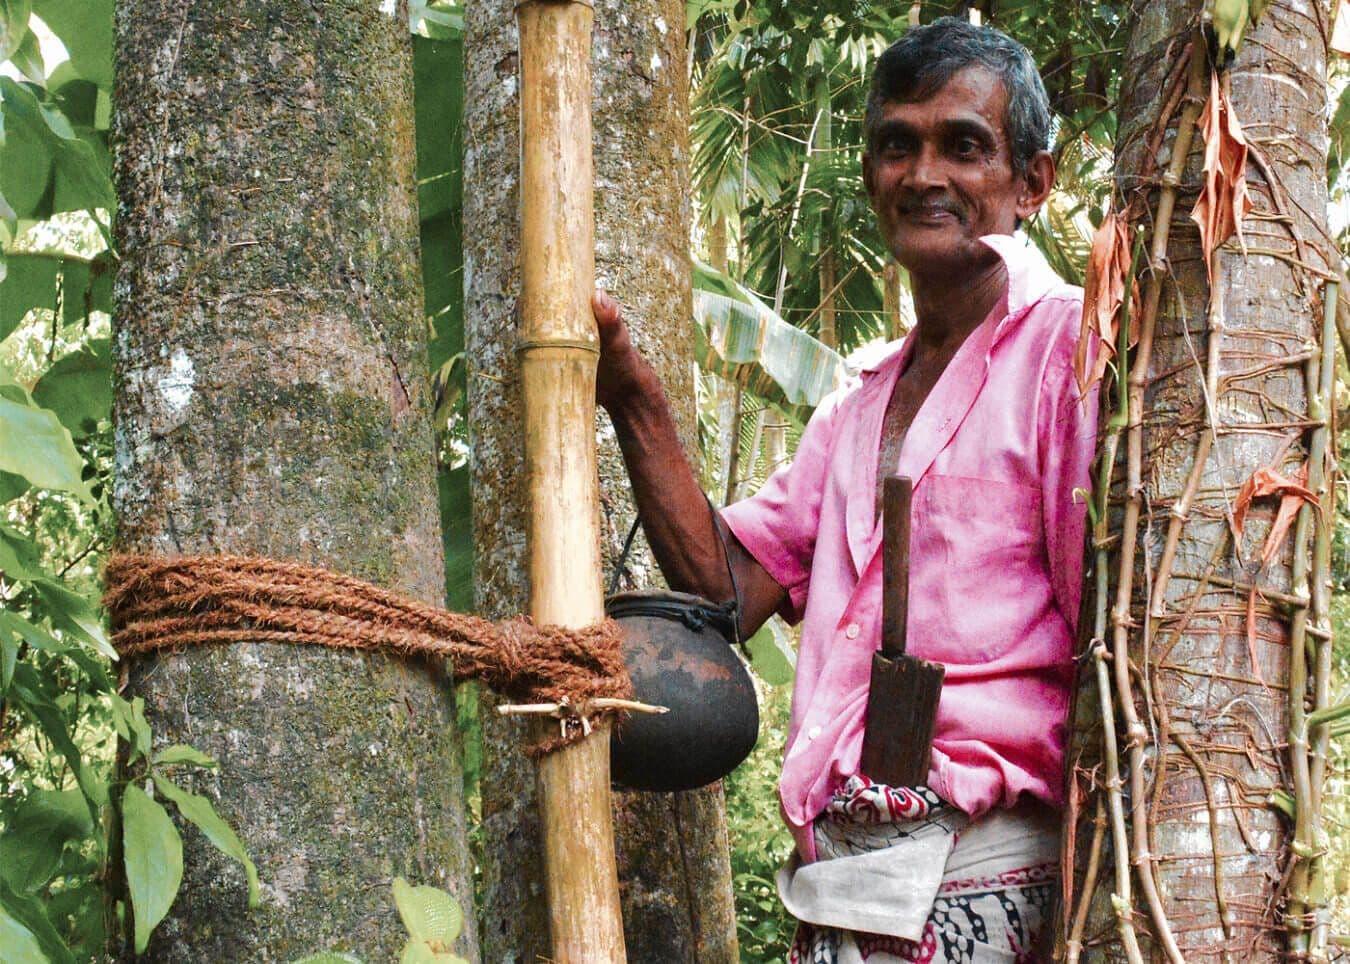 A view of a man kithul palm toddy collection(Juggery making alcohol) from the palm tree